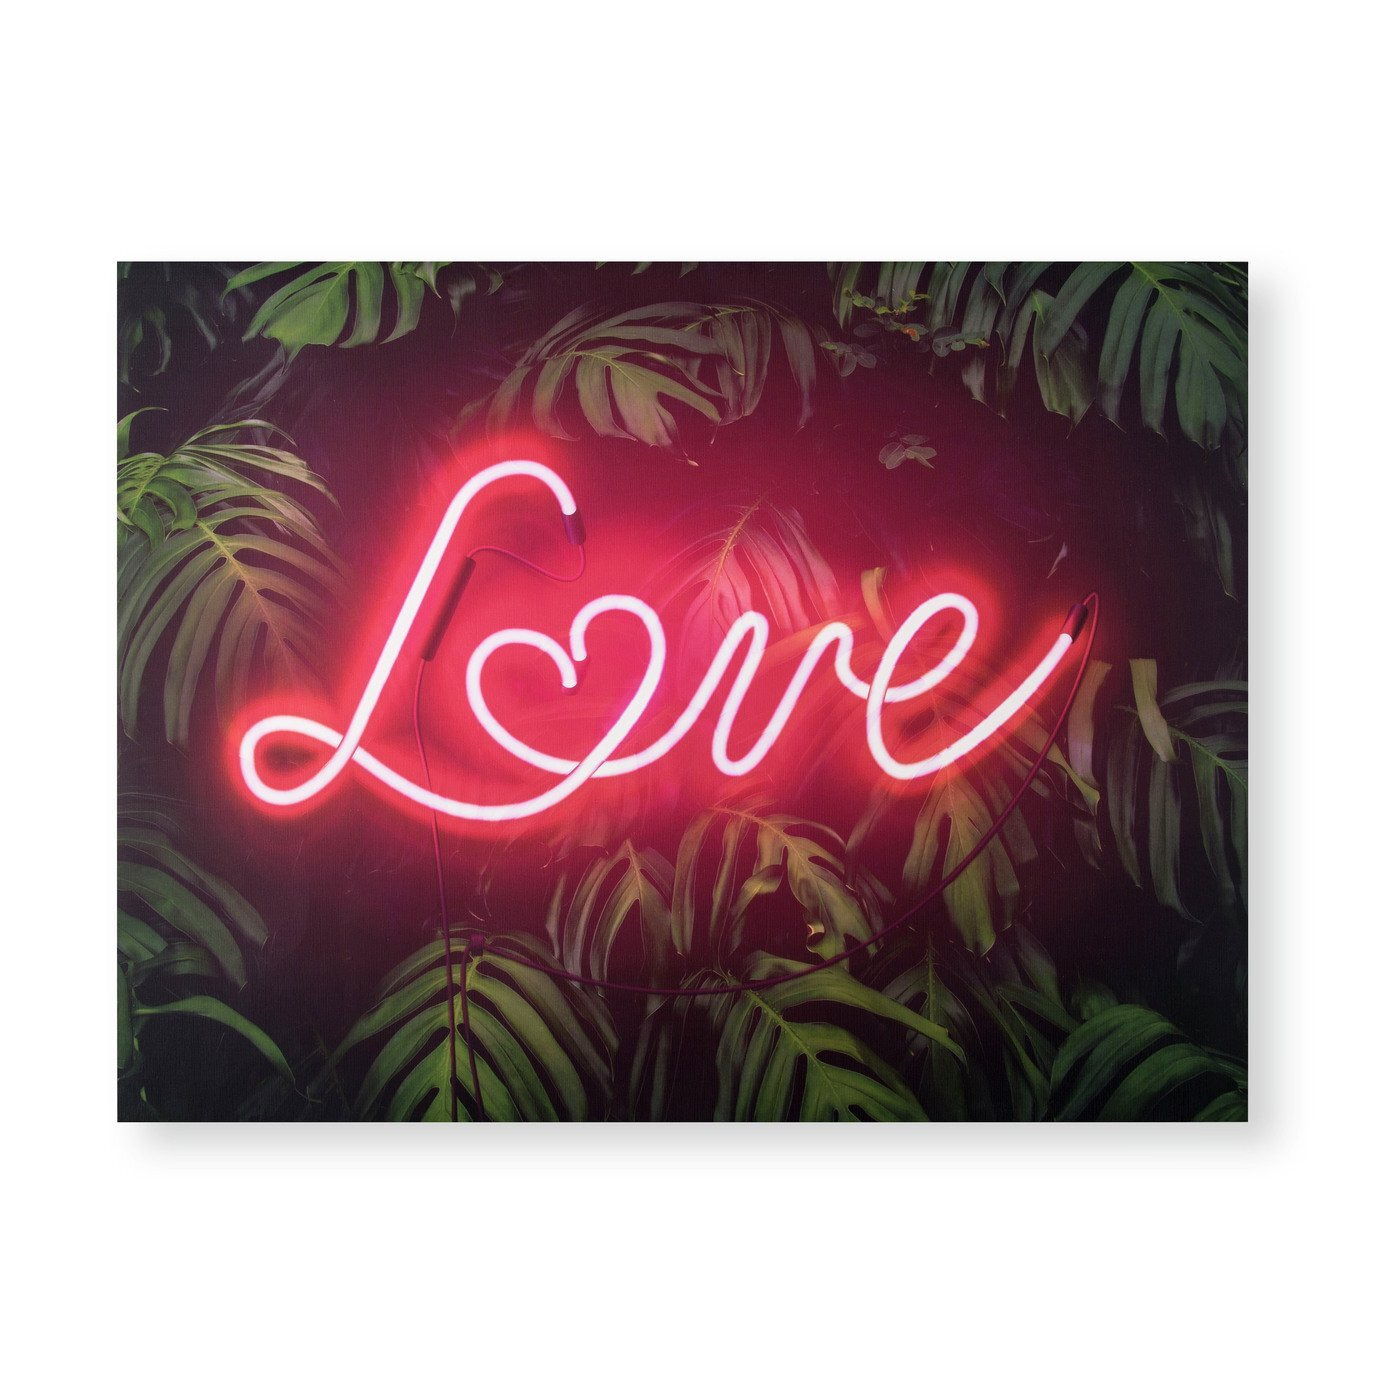 Art for the Home Tropical Neon Love Canvas Wall Art -60x80cm - image 1